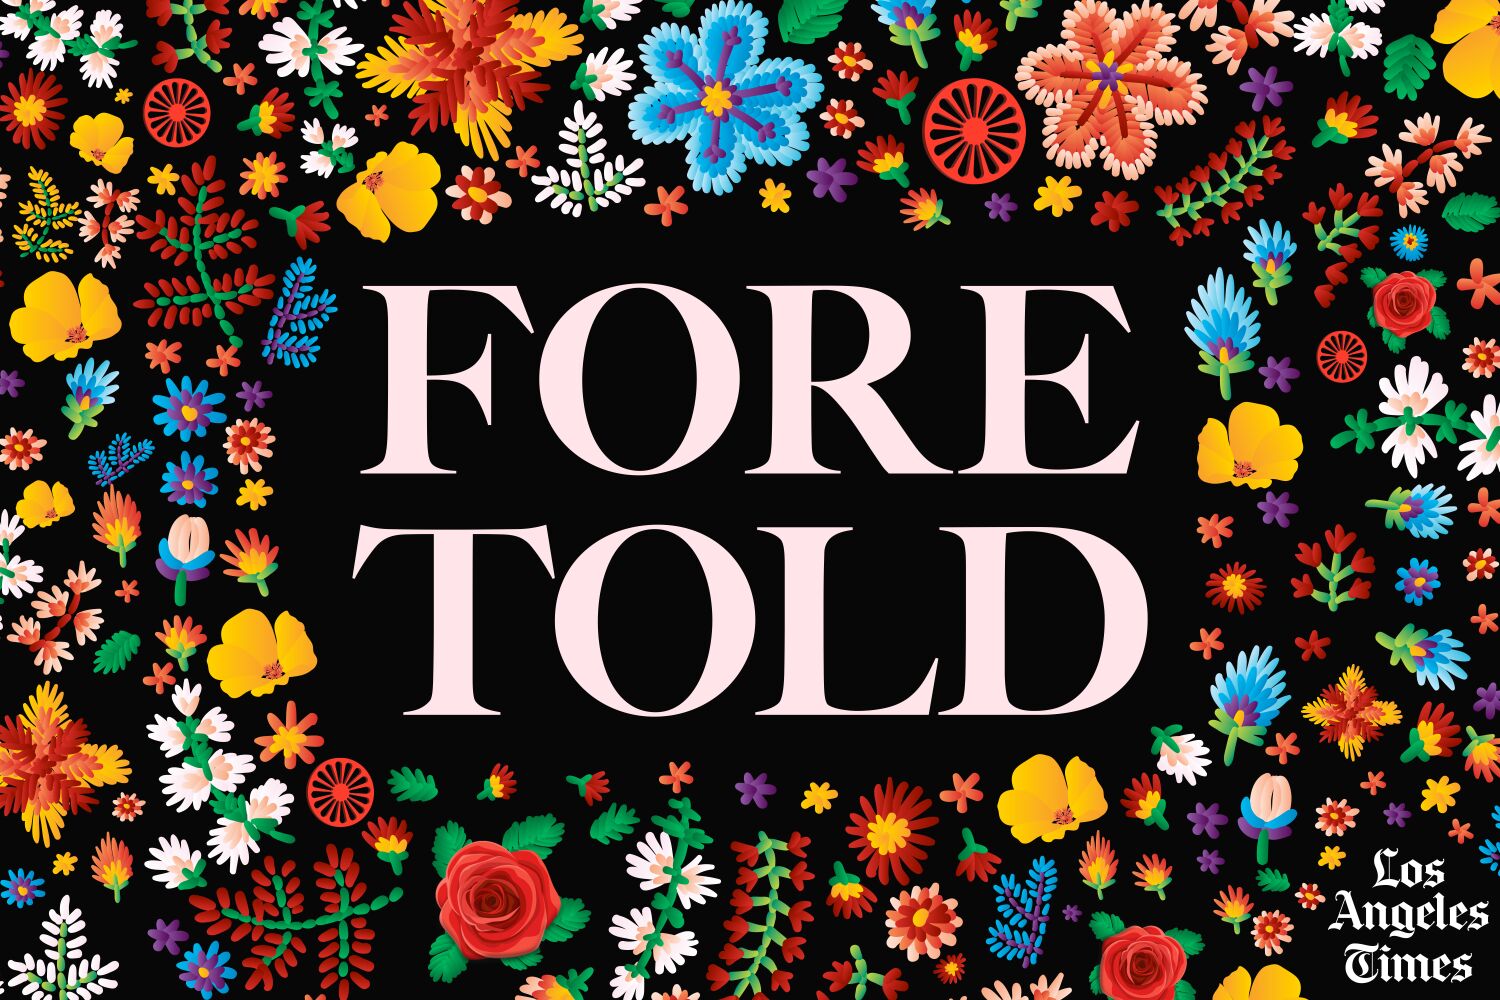 'Foretold' podcast showcases a Romani guitar-playing style that's 'doomed'